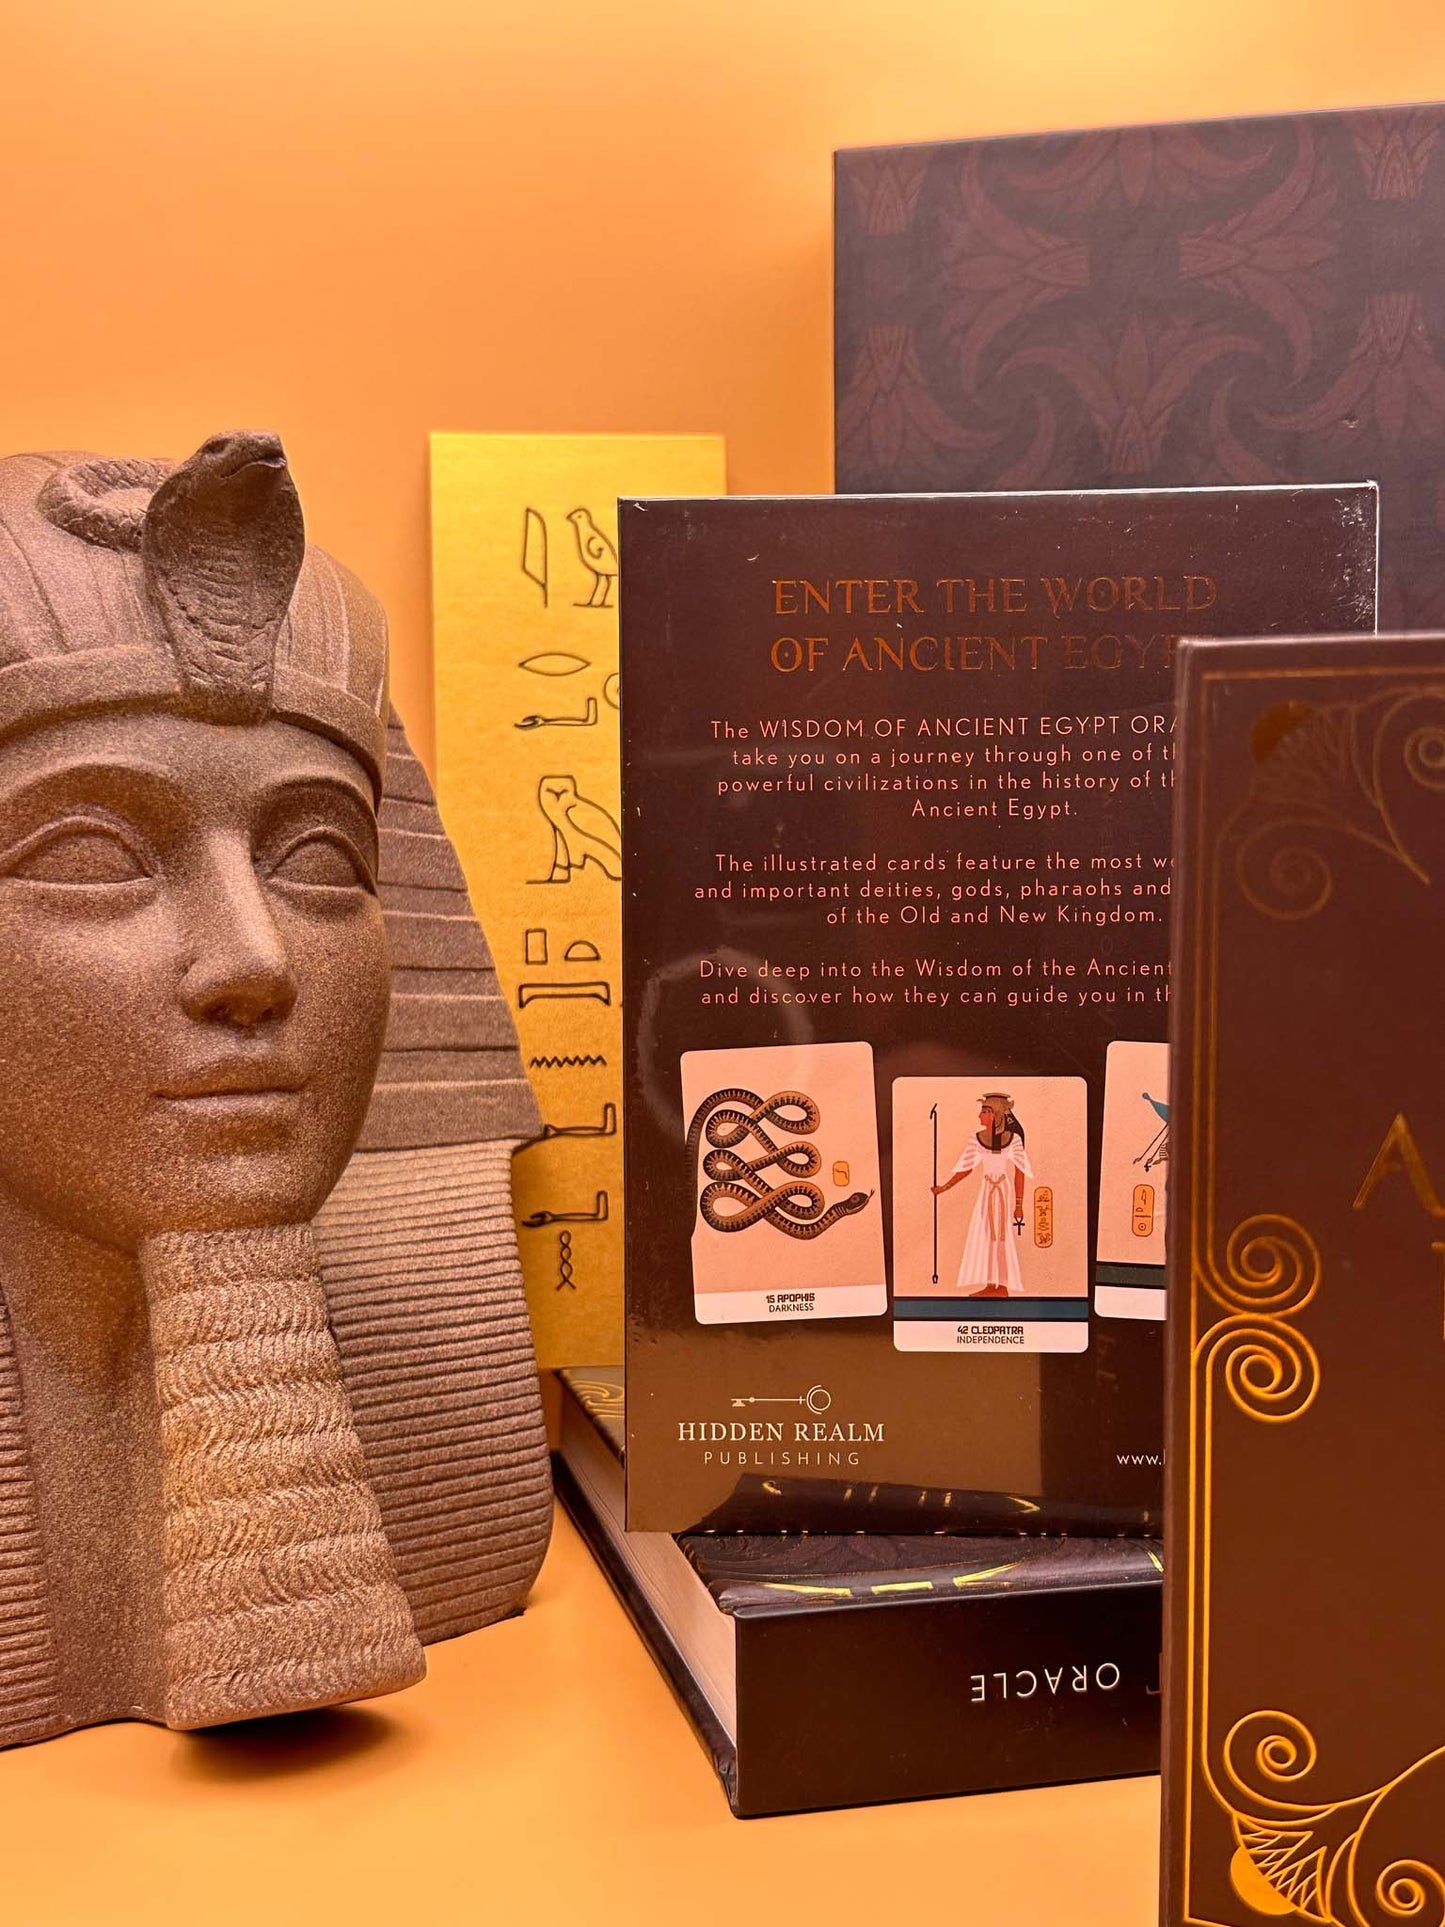 Bundle Pharaoness: Deck & Guidebook Deluxe & Pouch & Altar Cloth & Bookmark - WISDOM OF ANCIENT EGYPT ORACLE